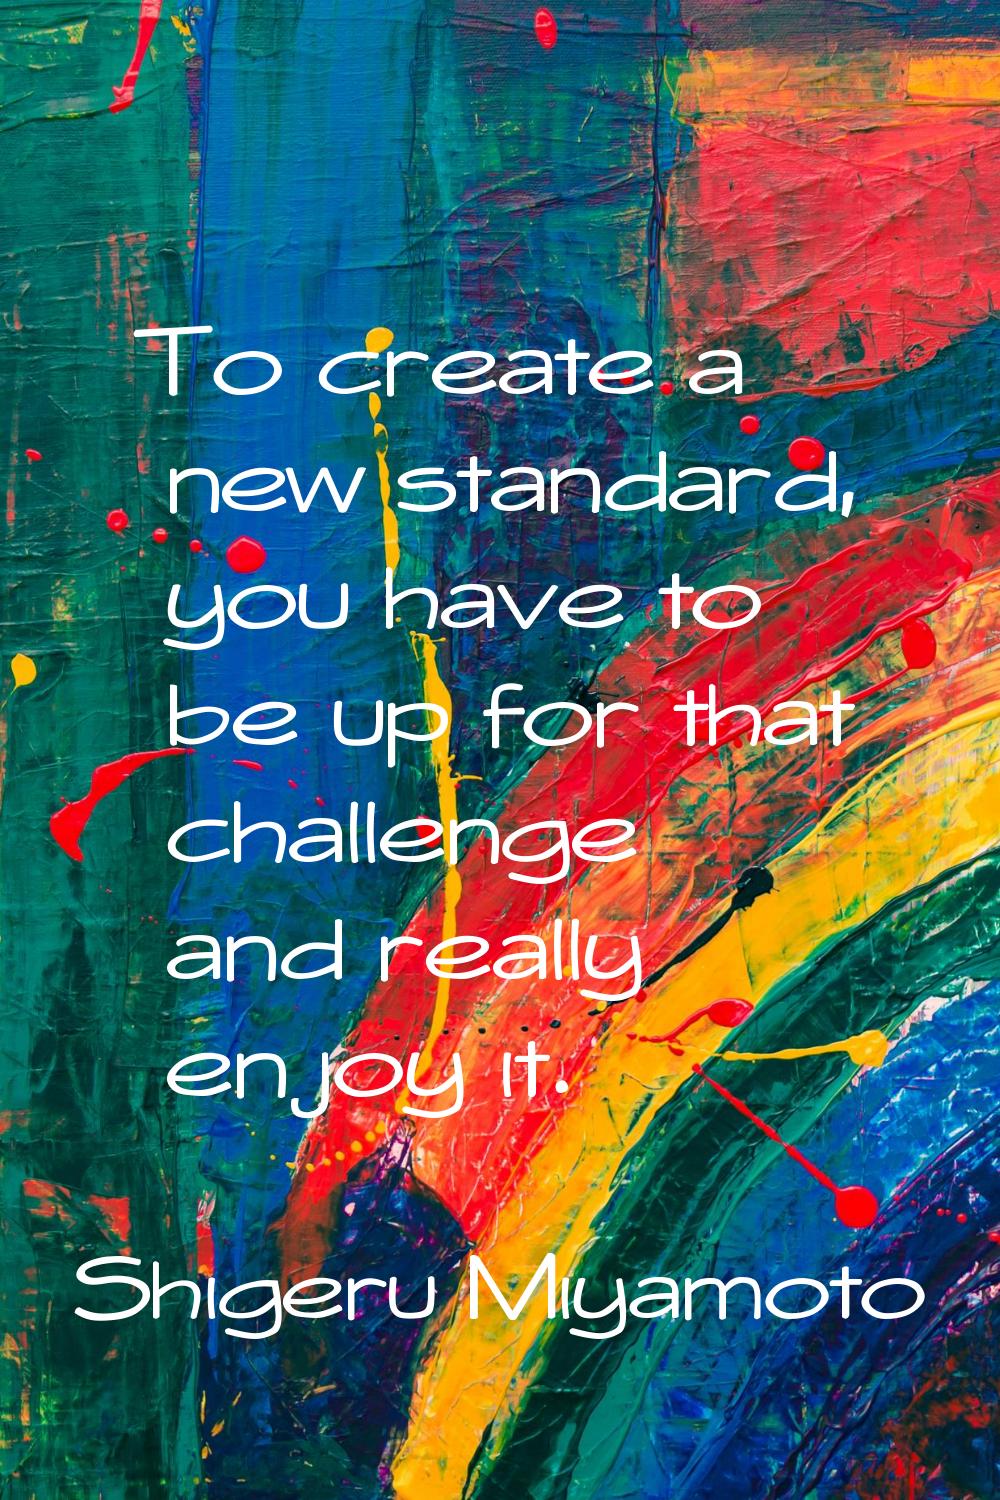 To create a new standard, you have to be up for that challenge and really enjoy it.